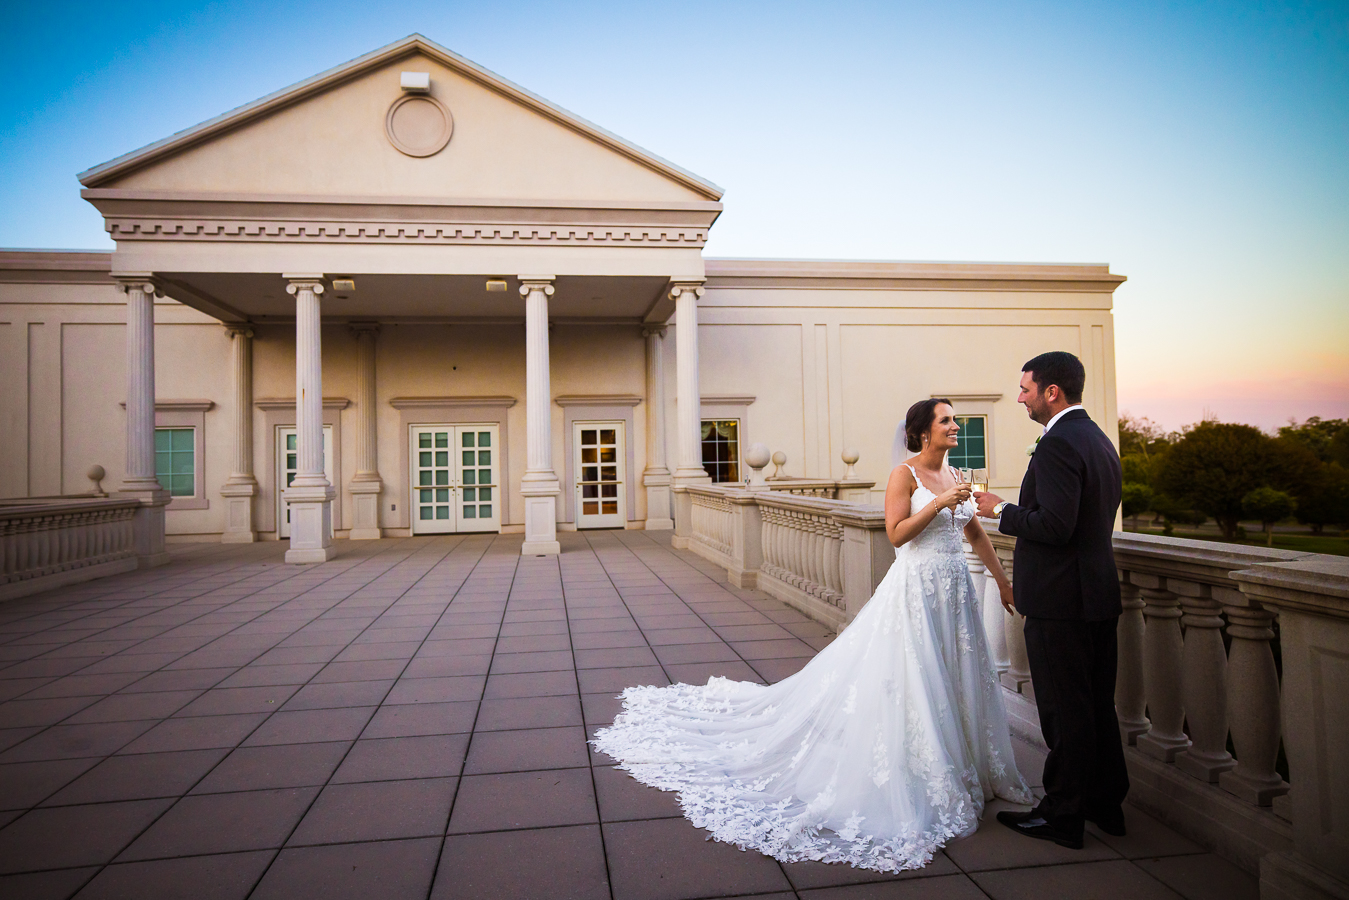 creative nj wedding photographer, lisa rhinehart, captures this unique, creative image of the bride and groom as they share a drink together outside of the palace at somerset park as the sun sets behind them and the sky has a mini rainbow before this black and gold wedding reception 